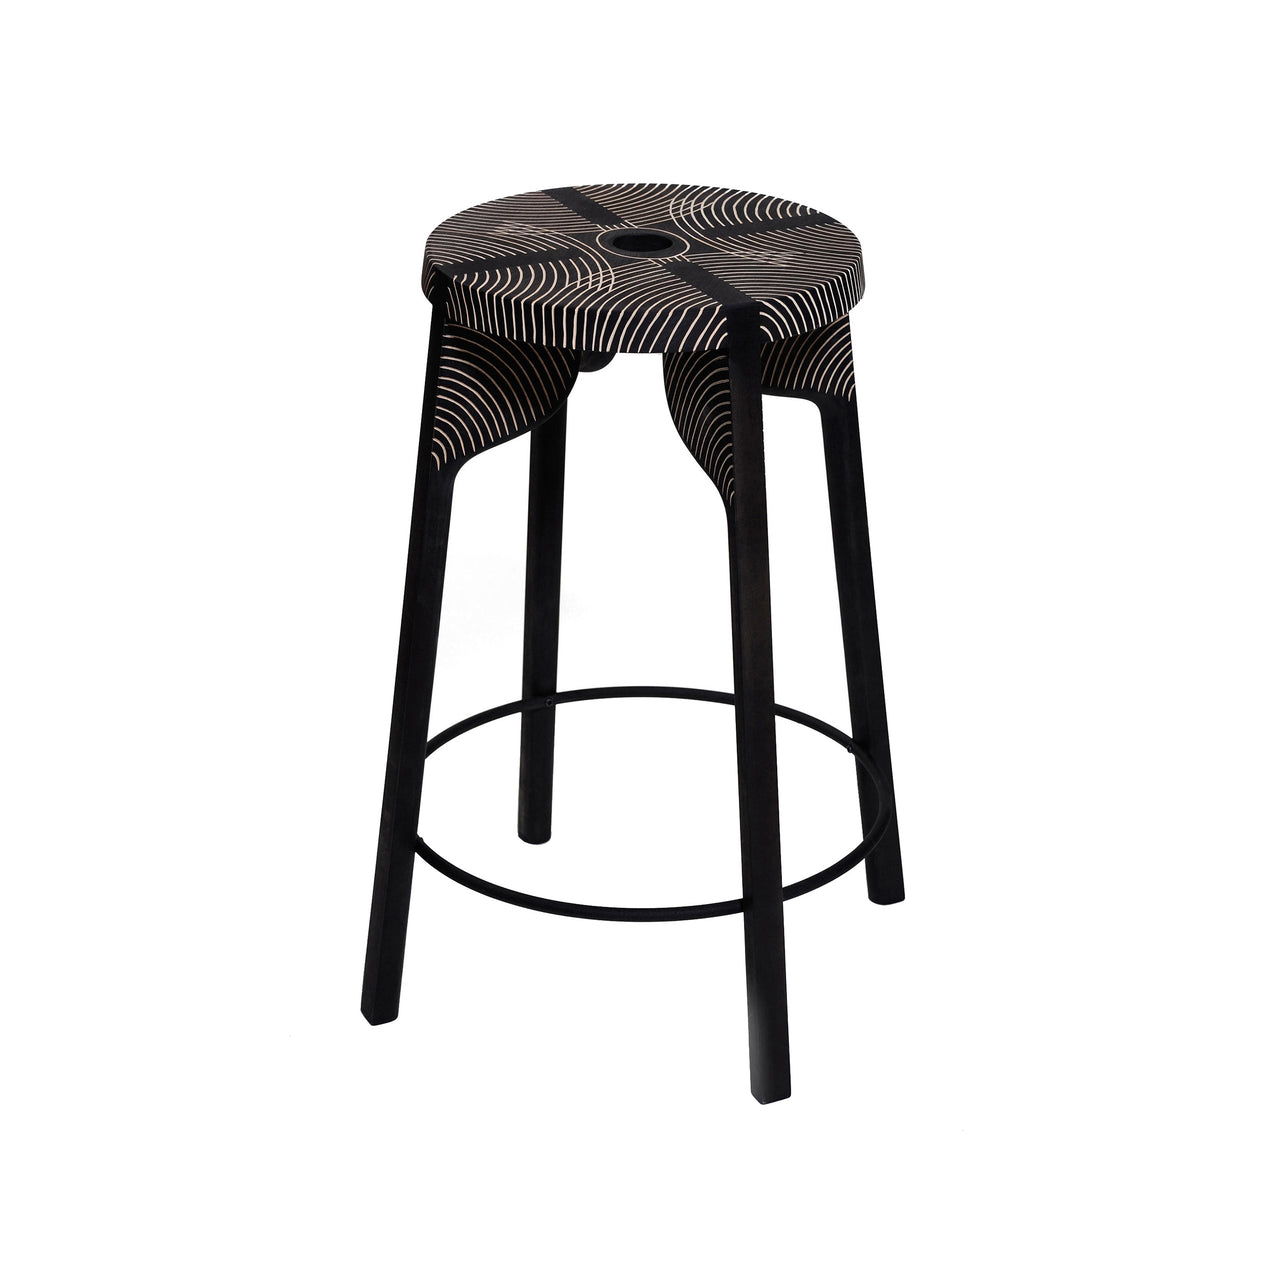 Tattoo Carved Bar + Counter Stool: Counter + Peacock + Black Maple + White + Black